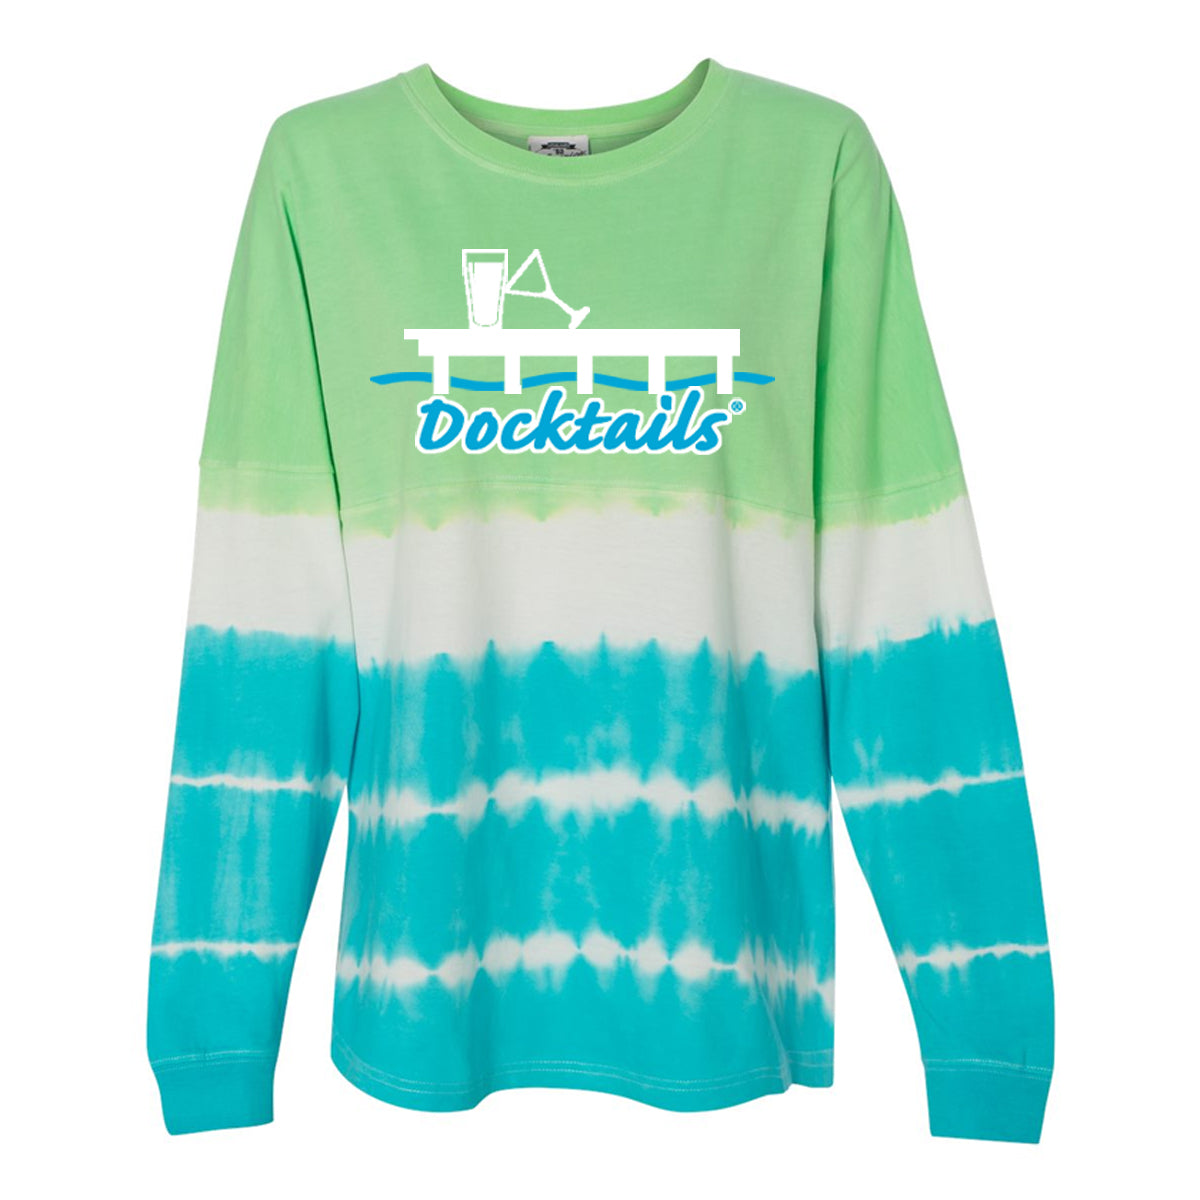 Women's Docktails longsleeve game day tie dye shirt, perfect for enjoying cocktails on your dock in cooler weather